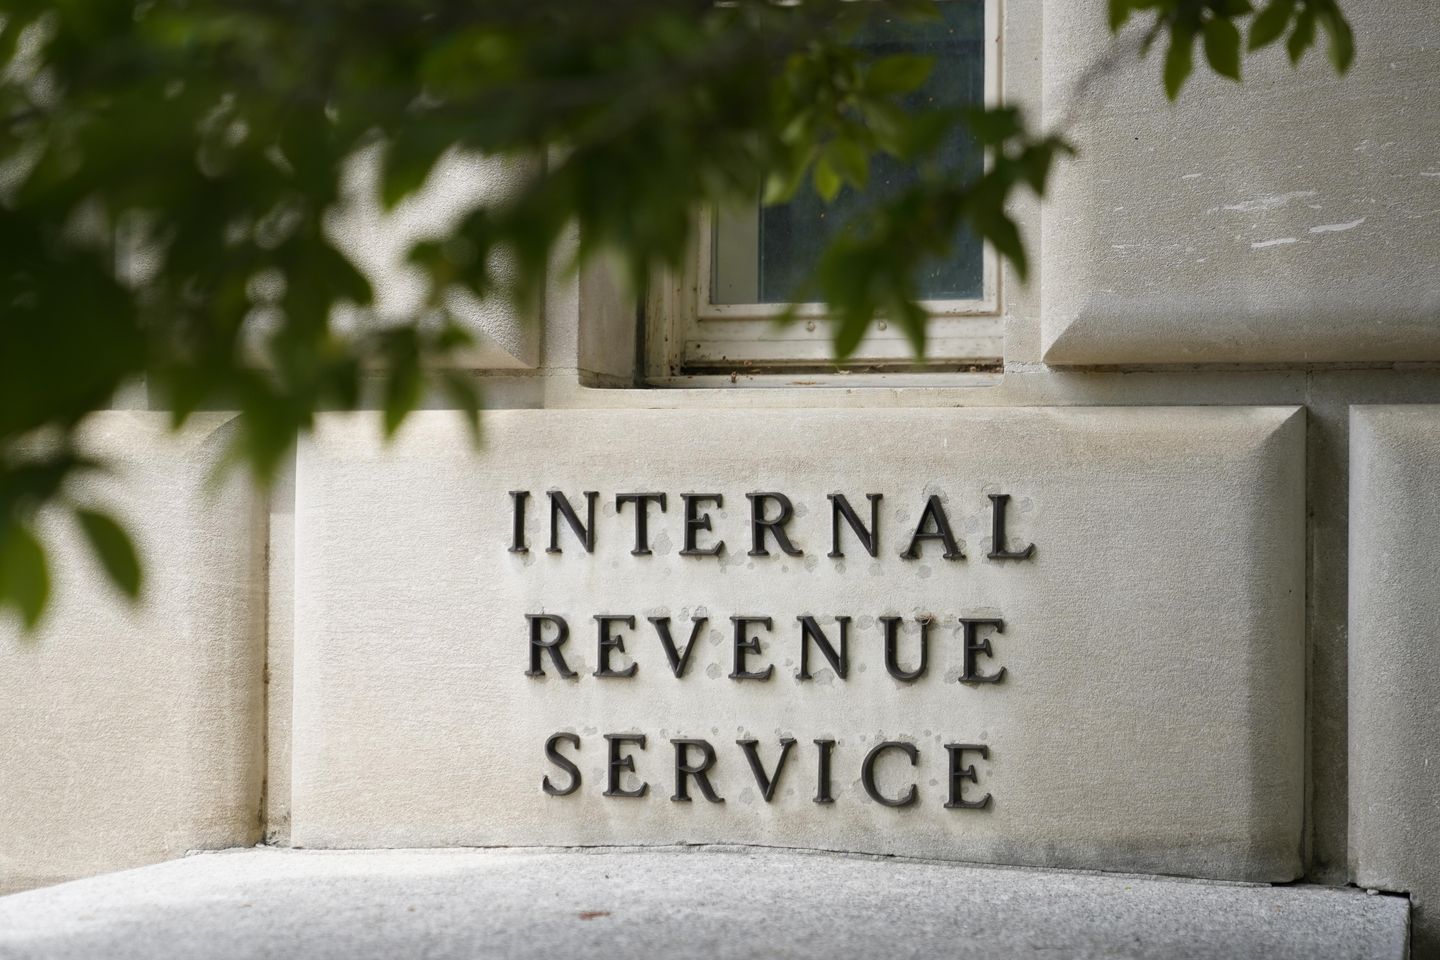 Feds accuse five IRS personnel of scamming COVID aid loans